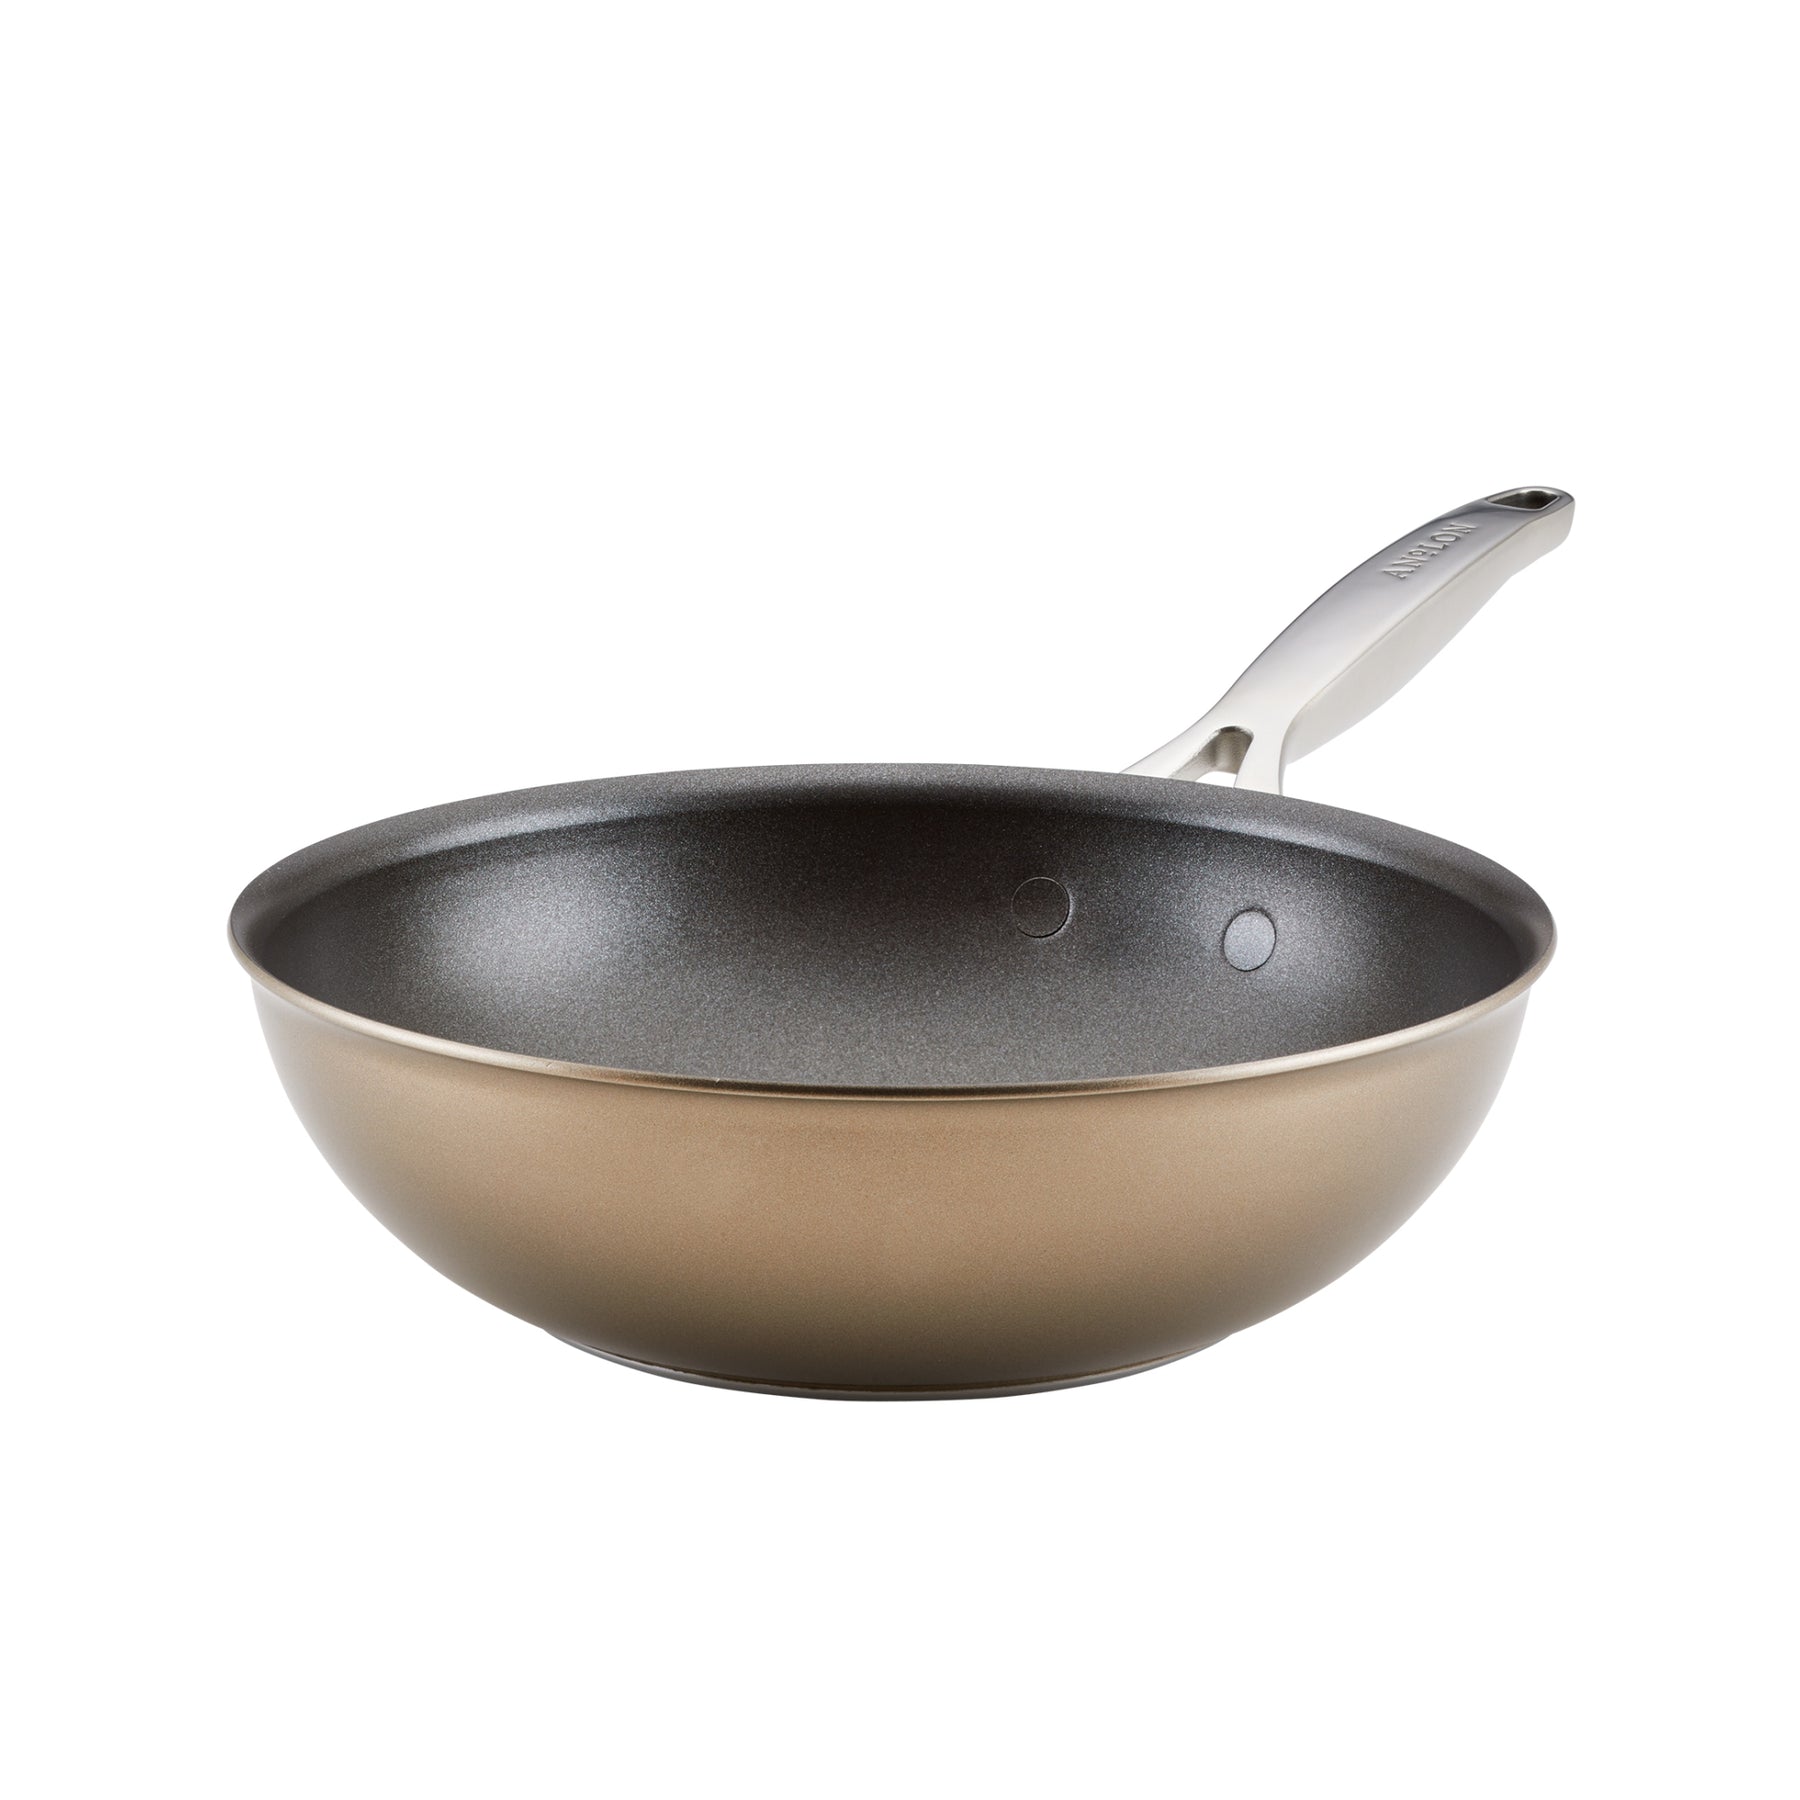 Anolon Triply Clad Stainless Steel Stir Fry Wok Pan, 10.75 Inch